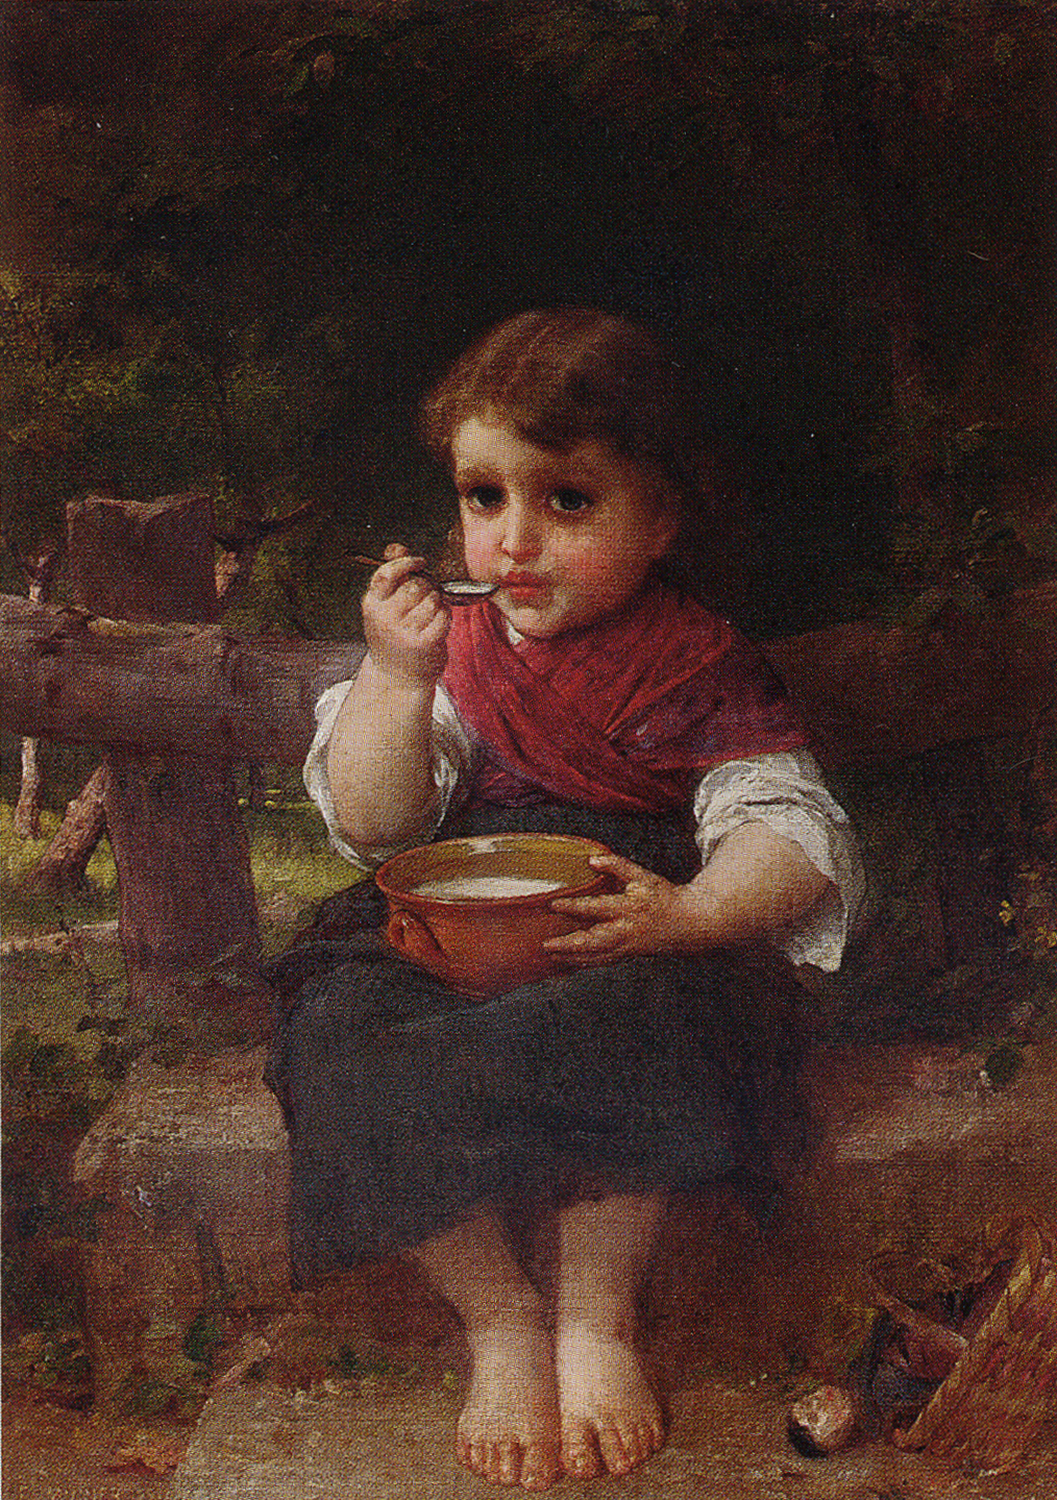 A young girl seated on steps with a bowl of milk